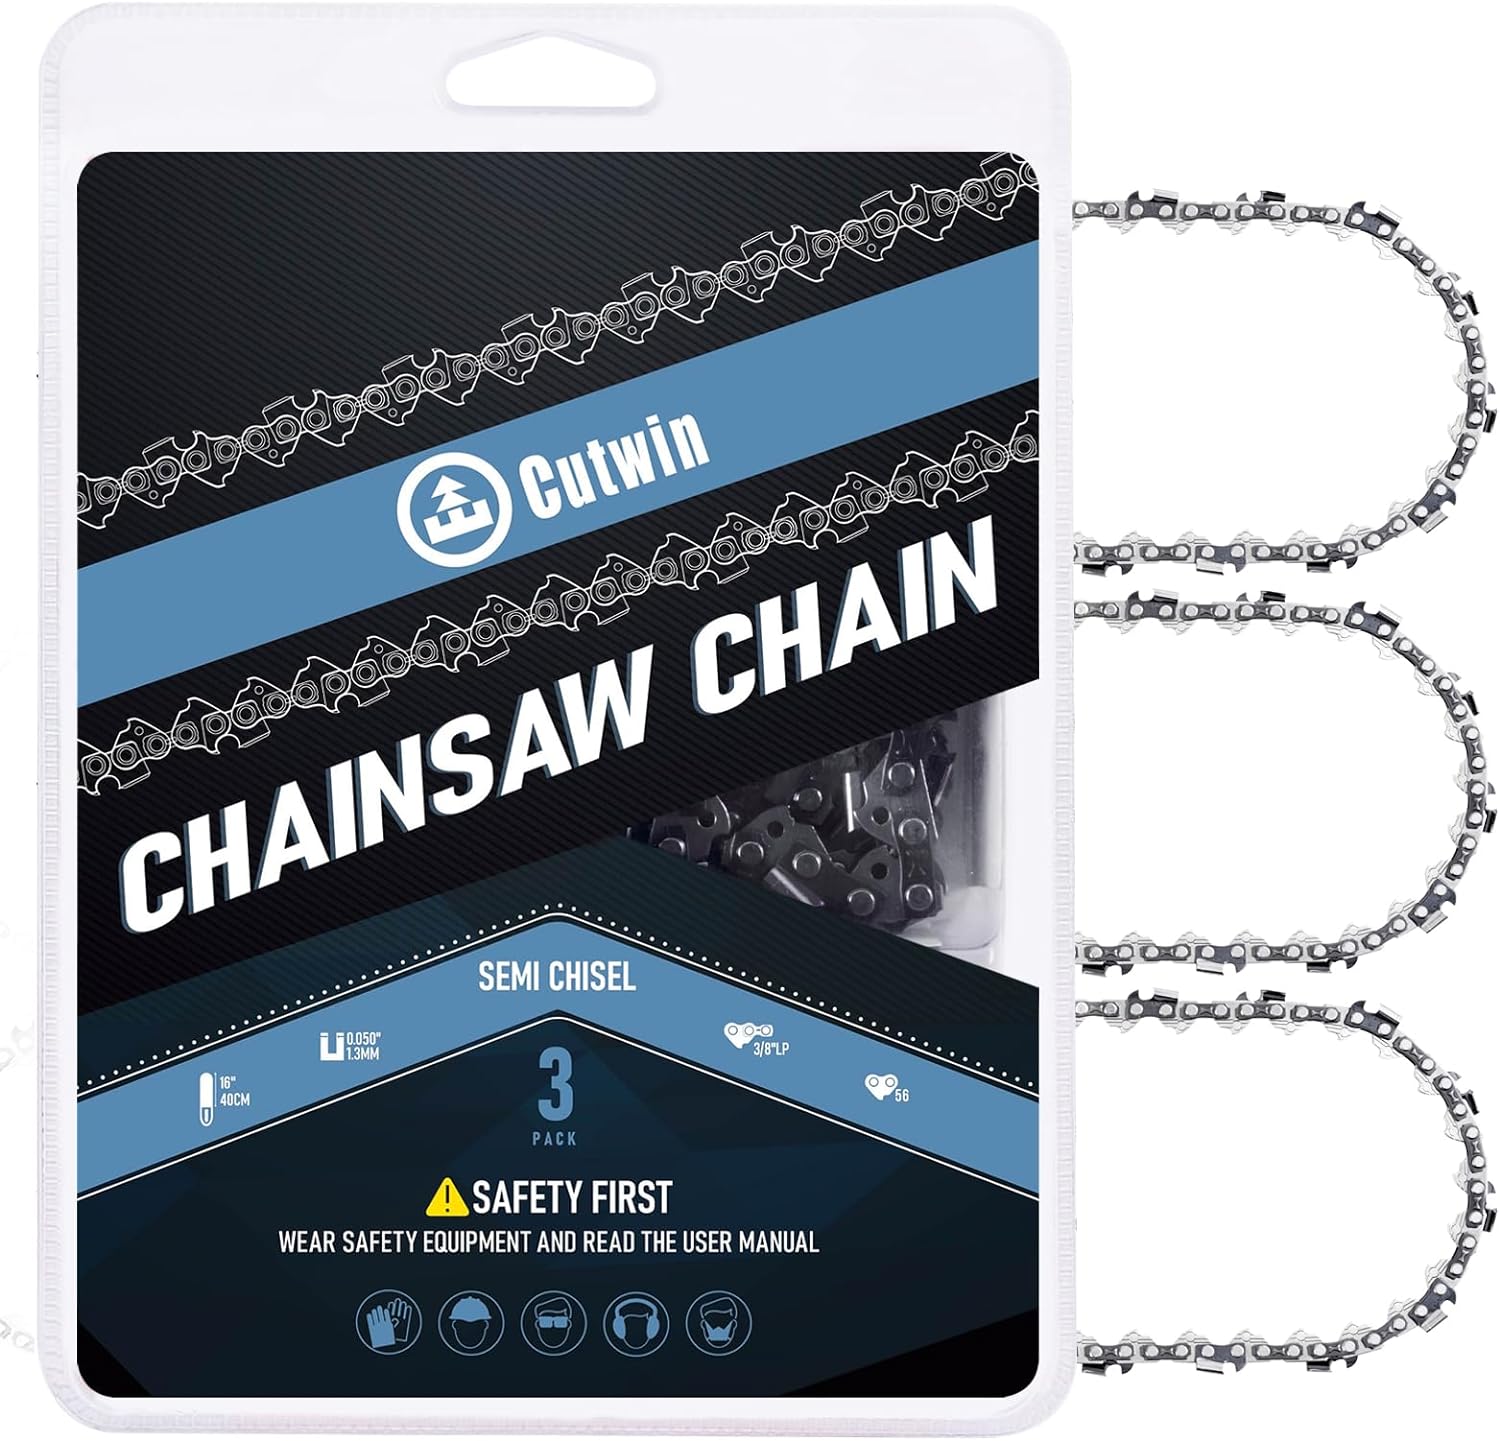 I decided to try this replacement chain out because of the price, similar brand name chains were priced from $20 - $29. I was so impressed with this one, I just now ordered another to keep as a spare!